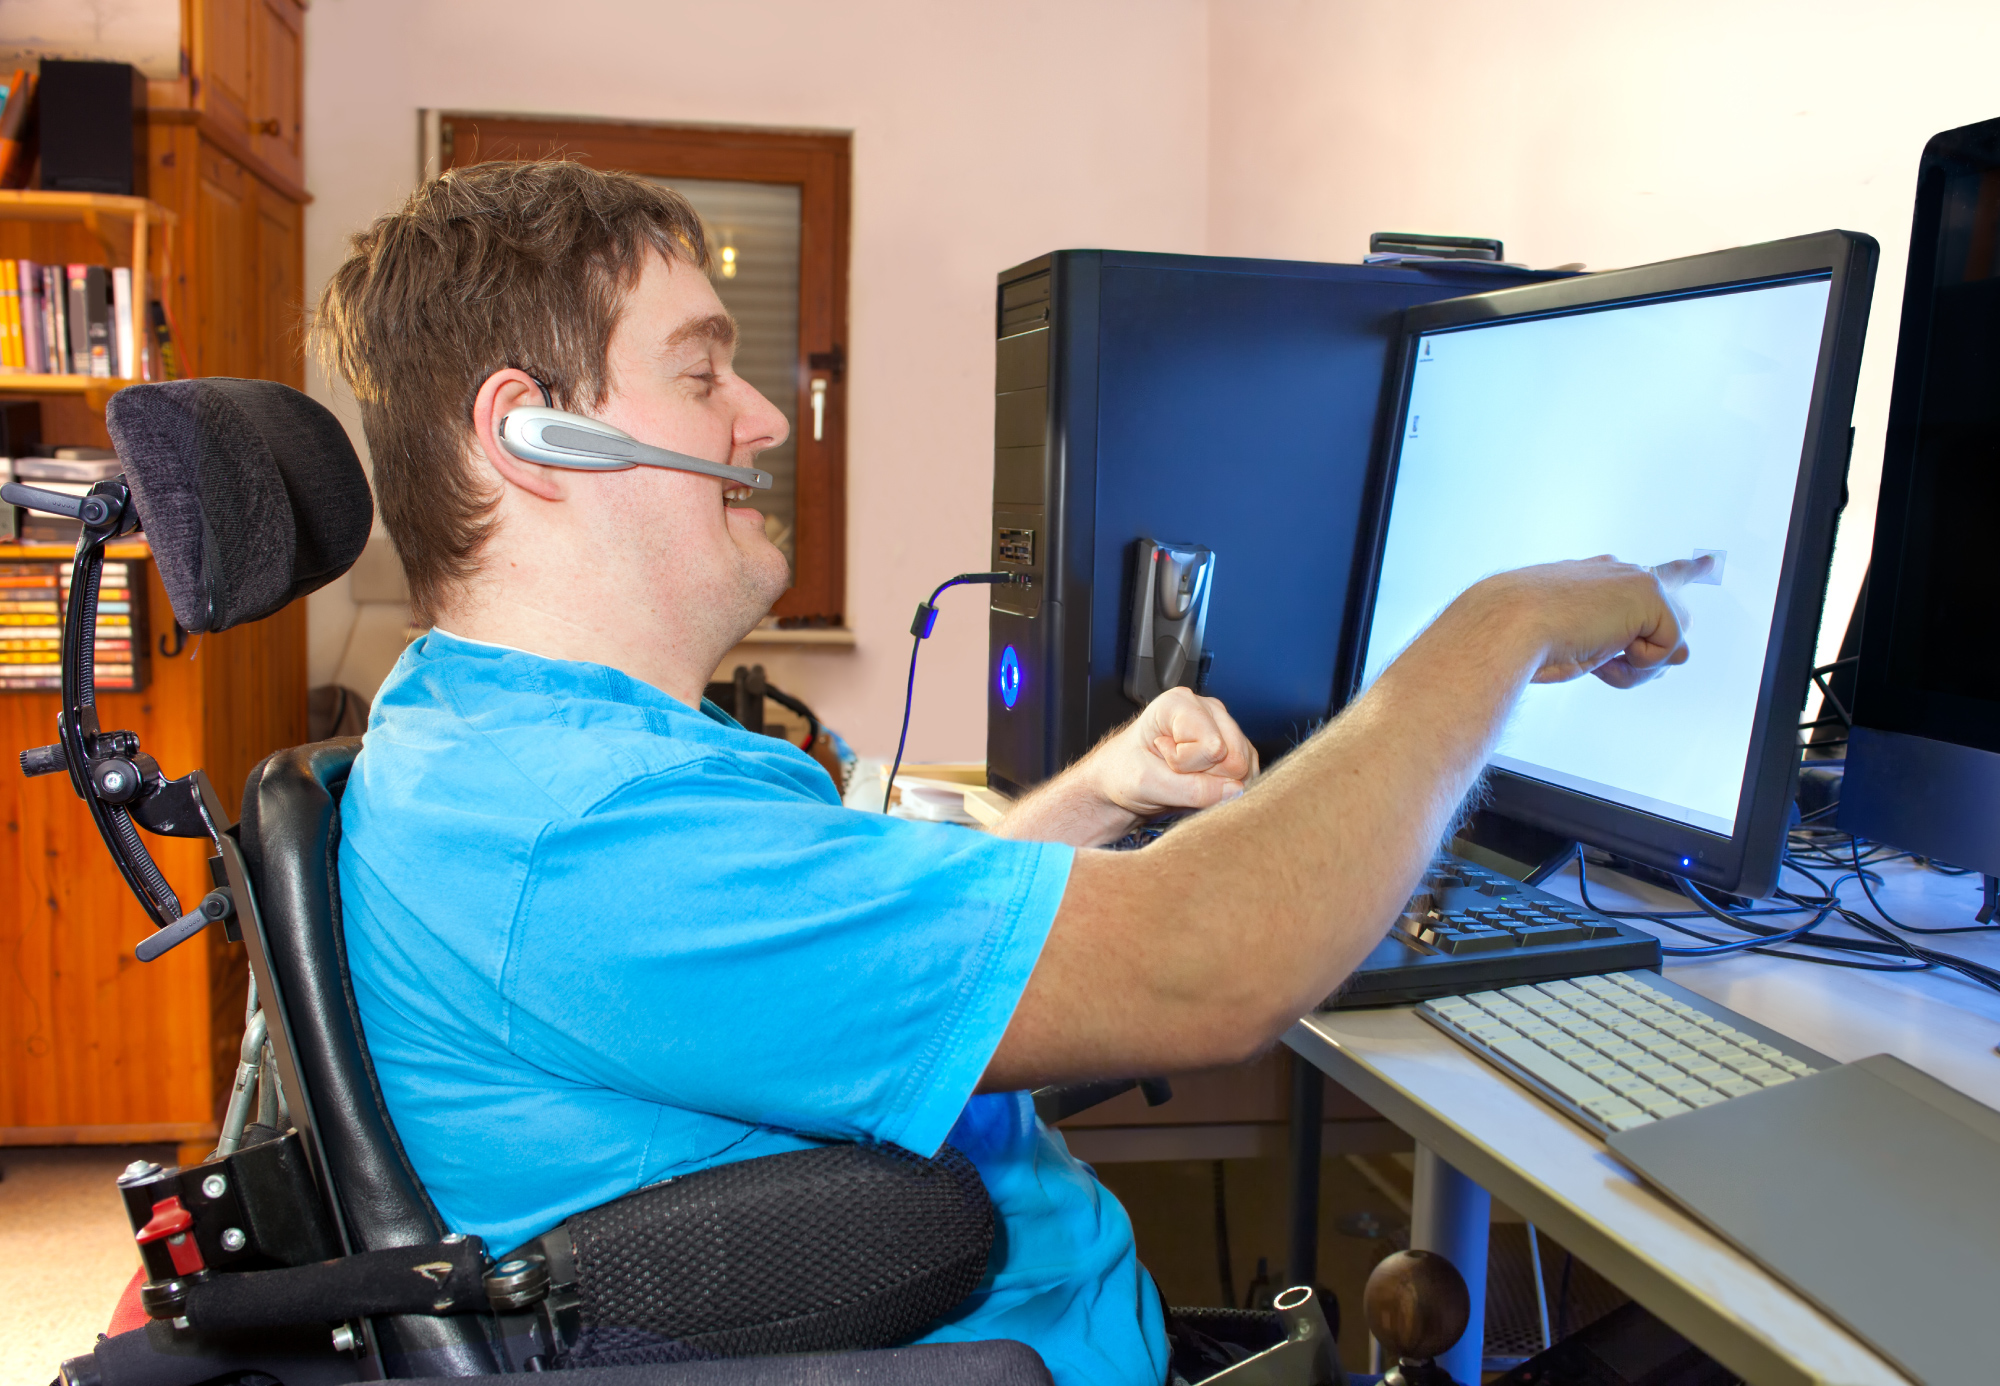 A disabled man in a wheelchair engaging and interacting with a PC set up